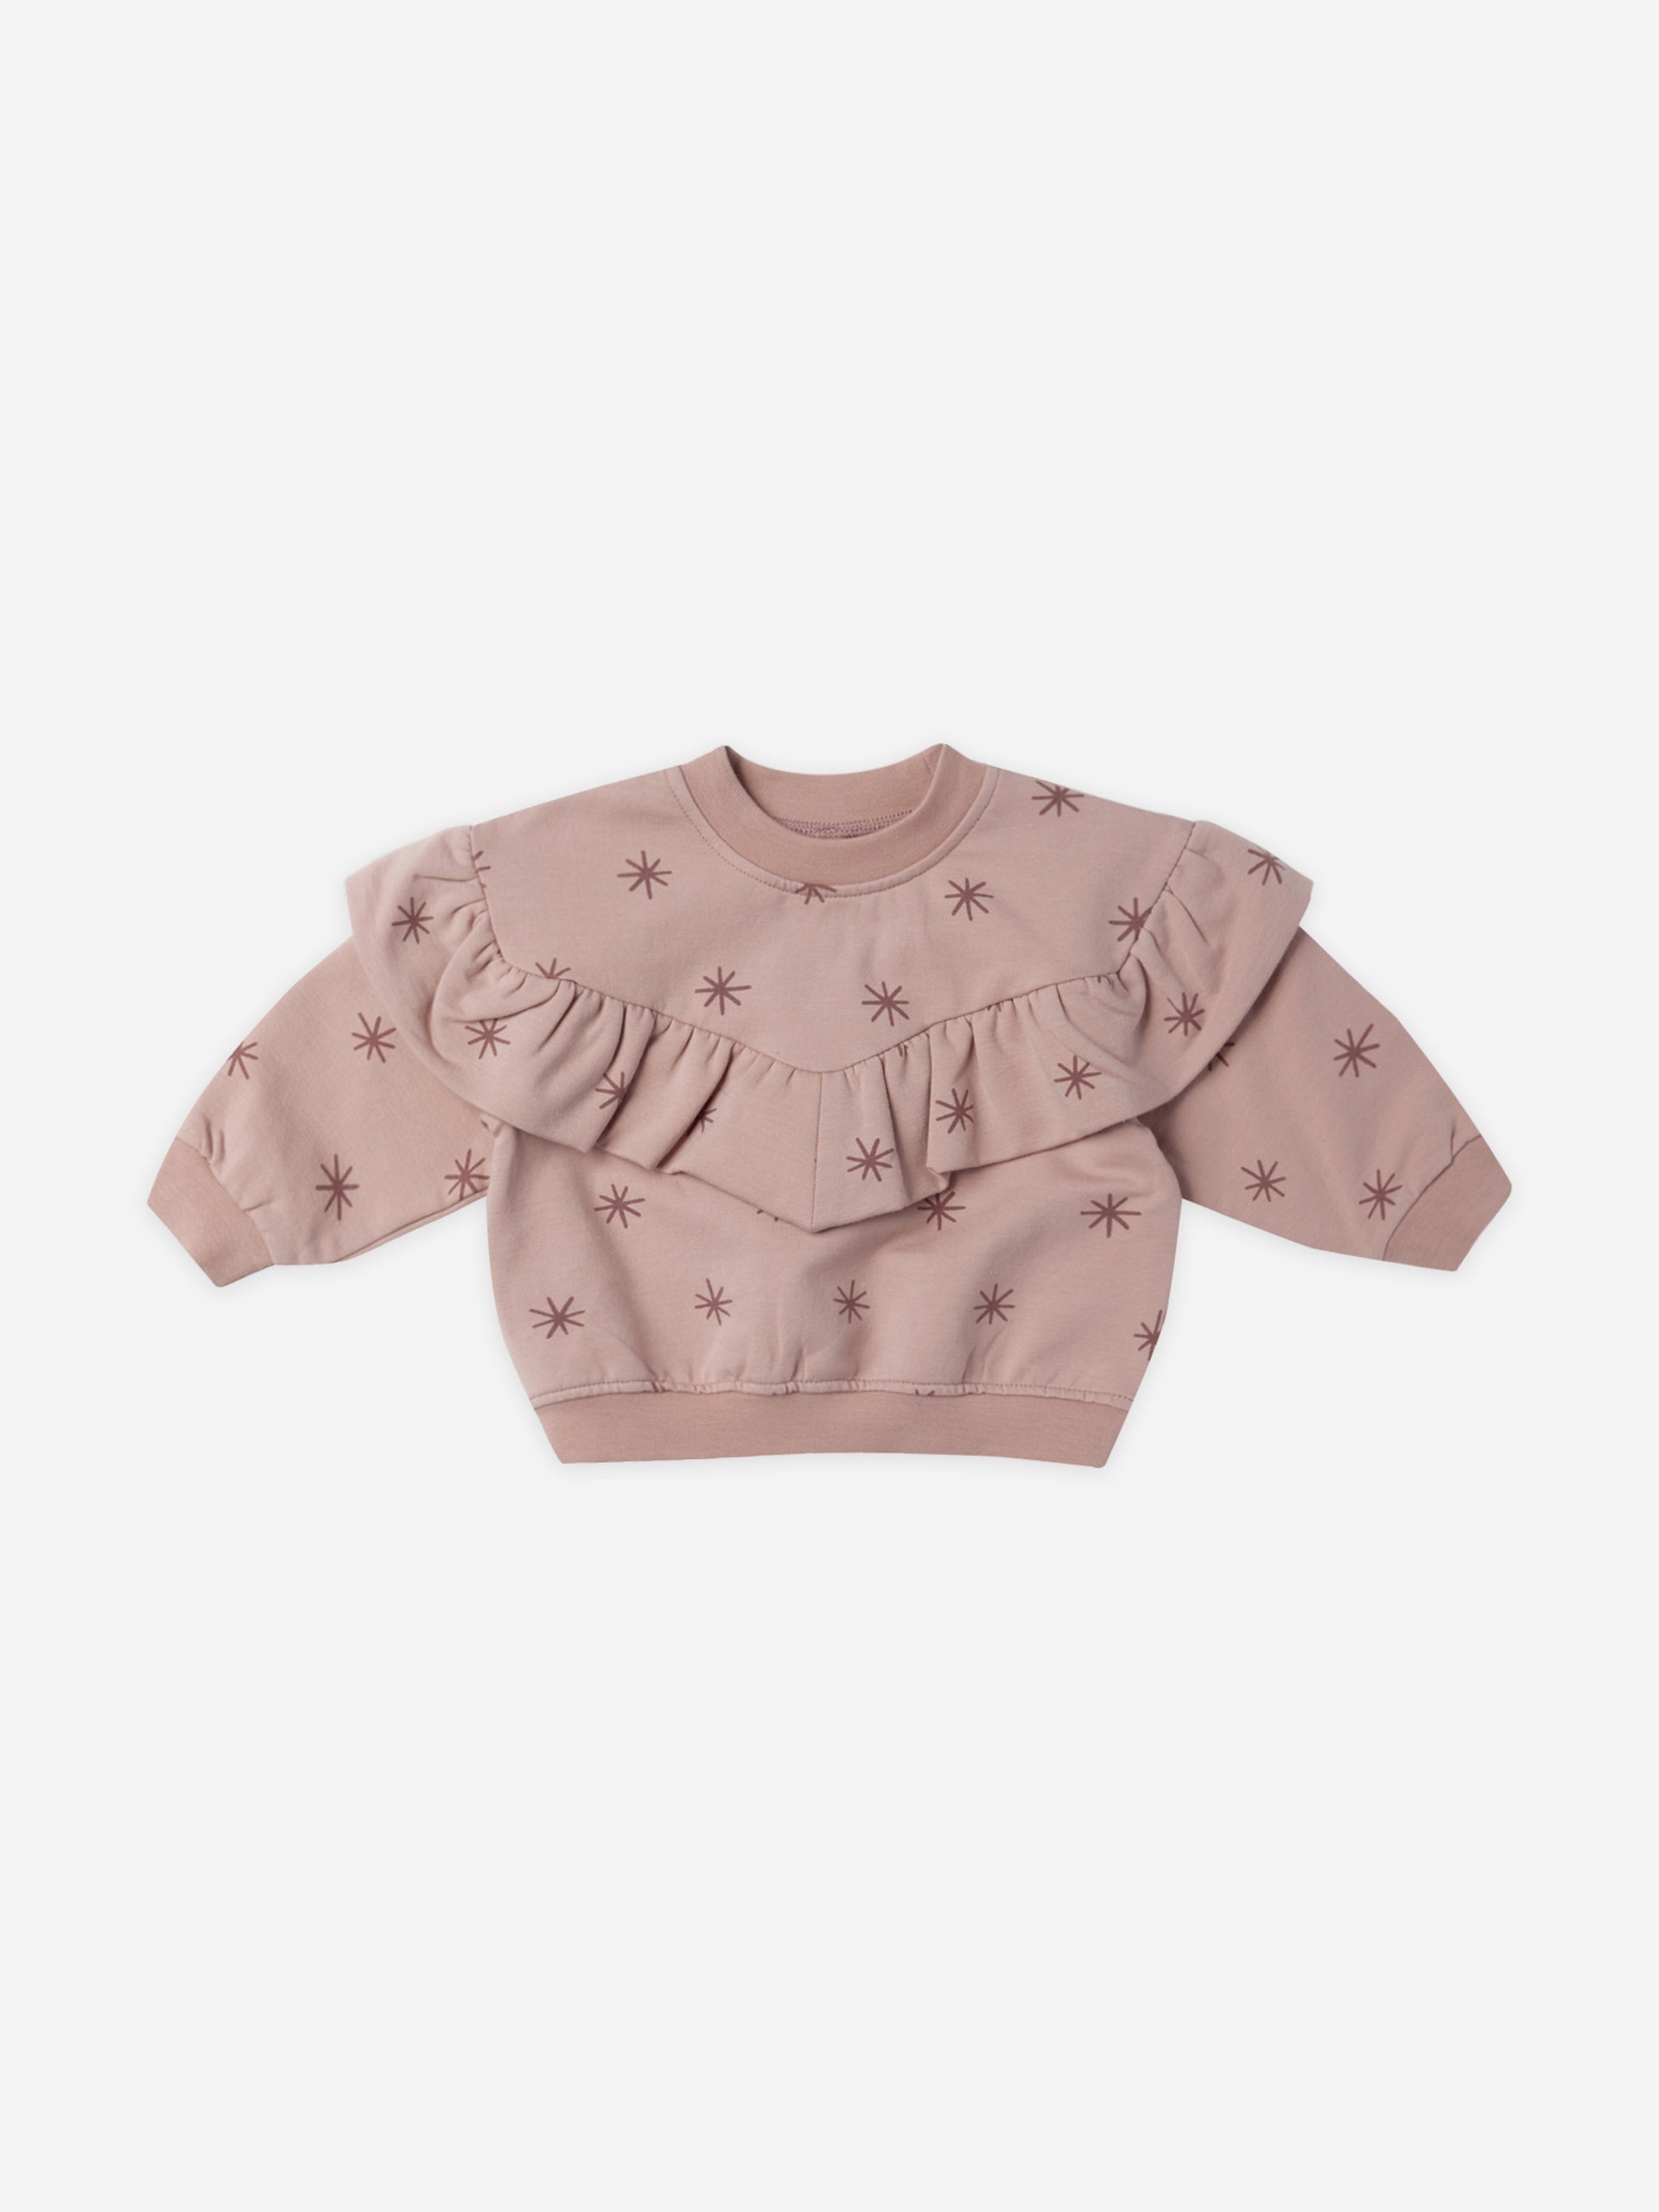 Ruffle Fleece Sweatshirt || Snow Stars - Rylee + Cru | Kids Clothes | Trendy Baby Clothes | Modern Infant Outfits |